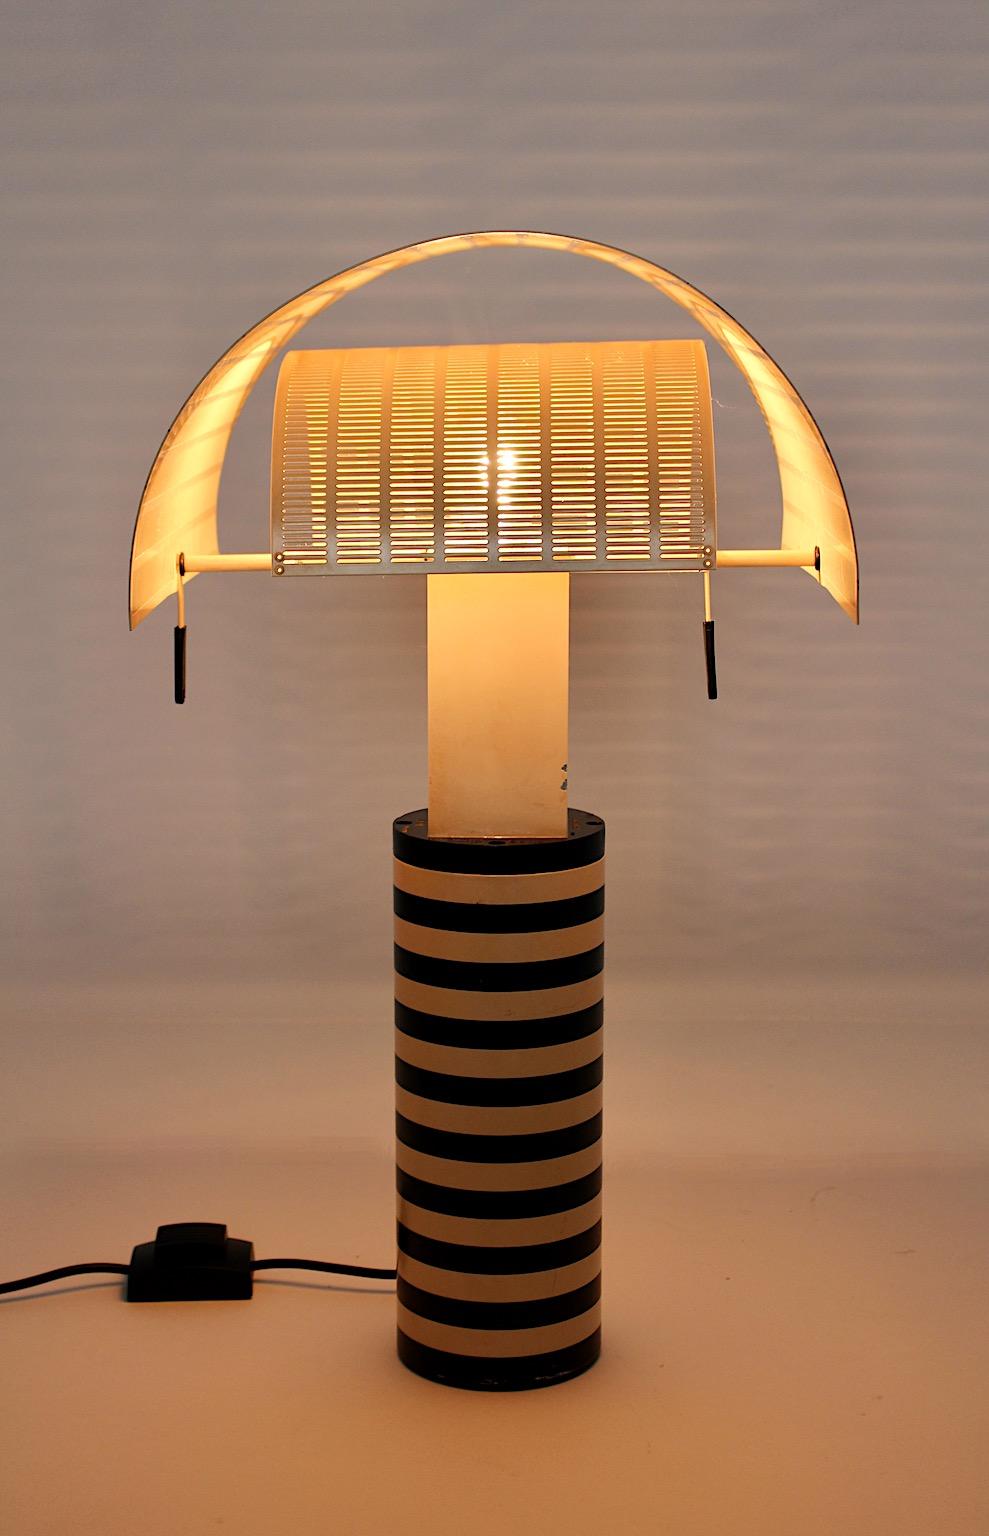 Postmodern vintage table lamp by Mario Bott in black and white color from plastic and metal circa 1986, Italy.
An iconic table lamp, model Shogun, designed by Mario Botta for Artemide 1986 Italy.
Mario Botta ( 1943 ) Swiss architect and